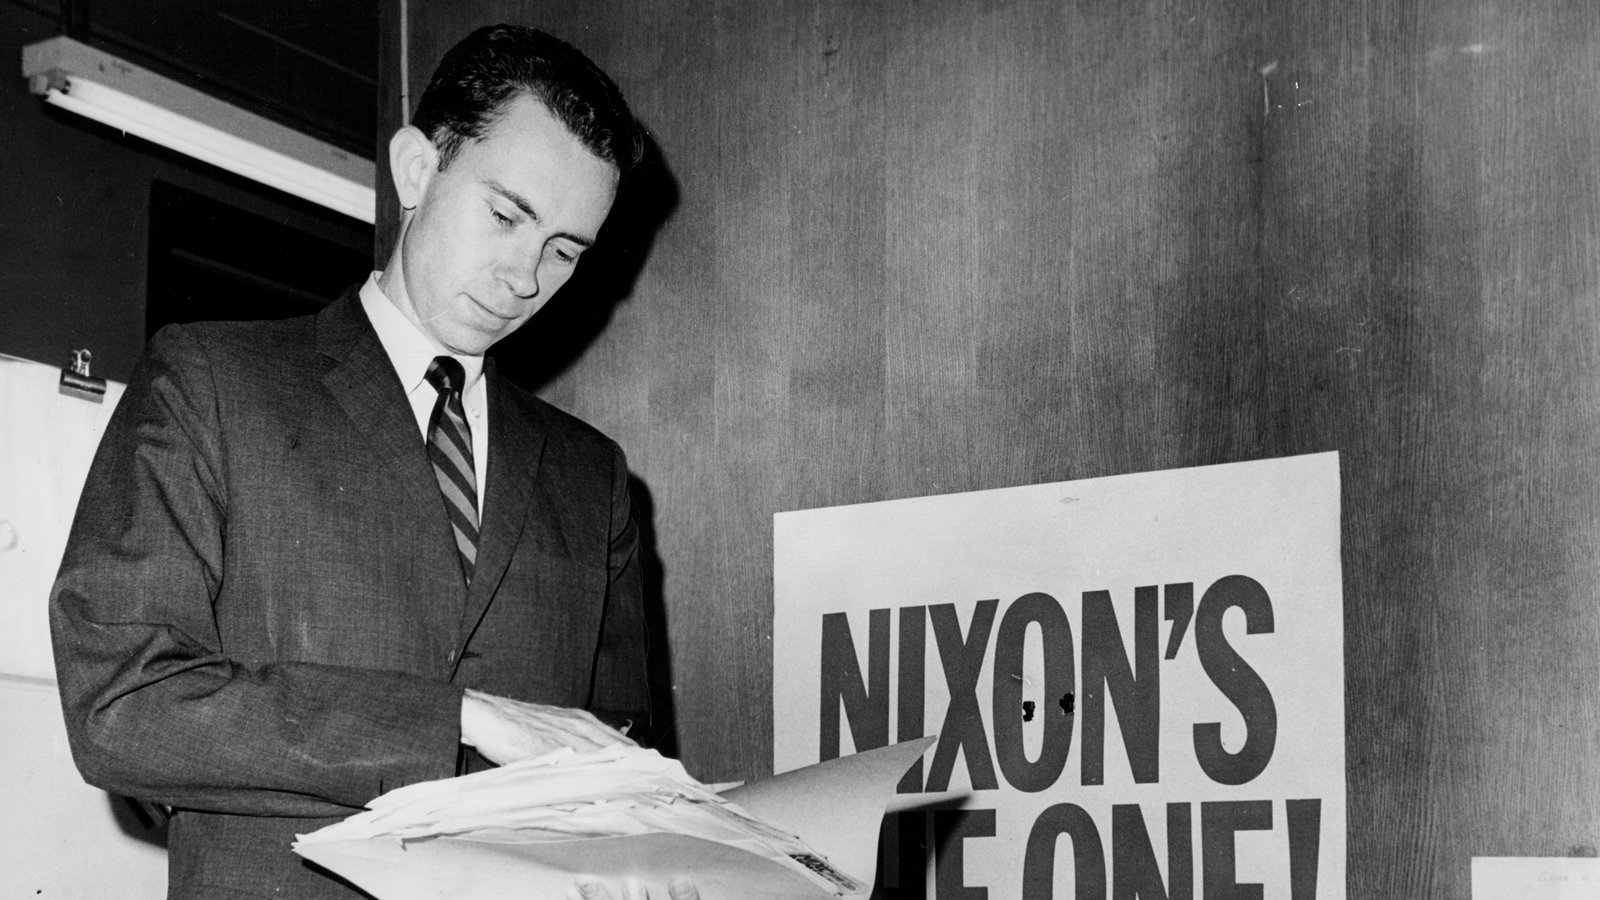 Edward Nixon, President's Brother and Champion, Is Dead